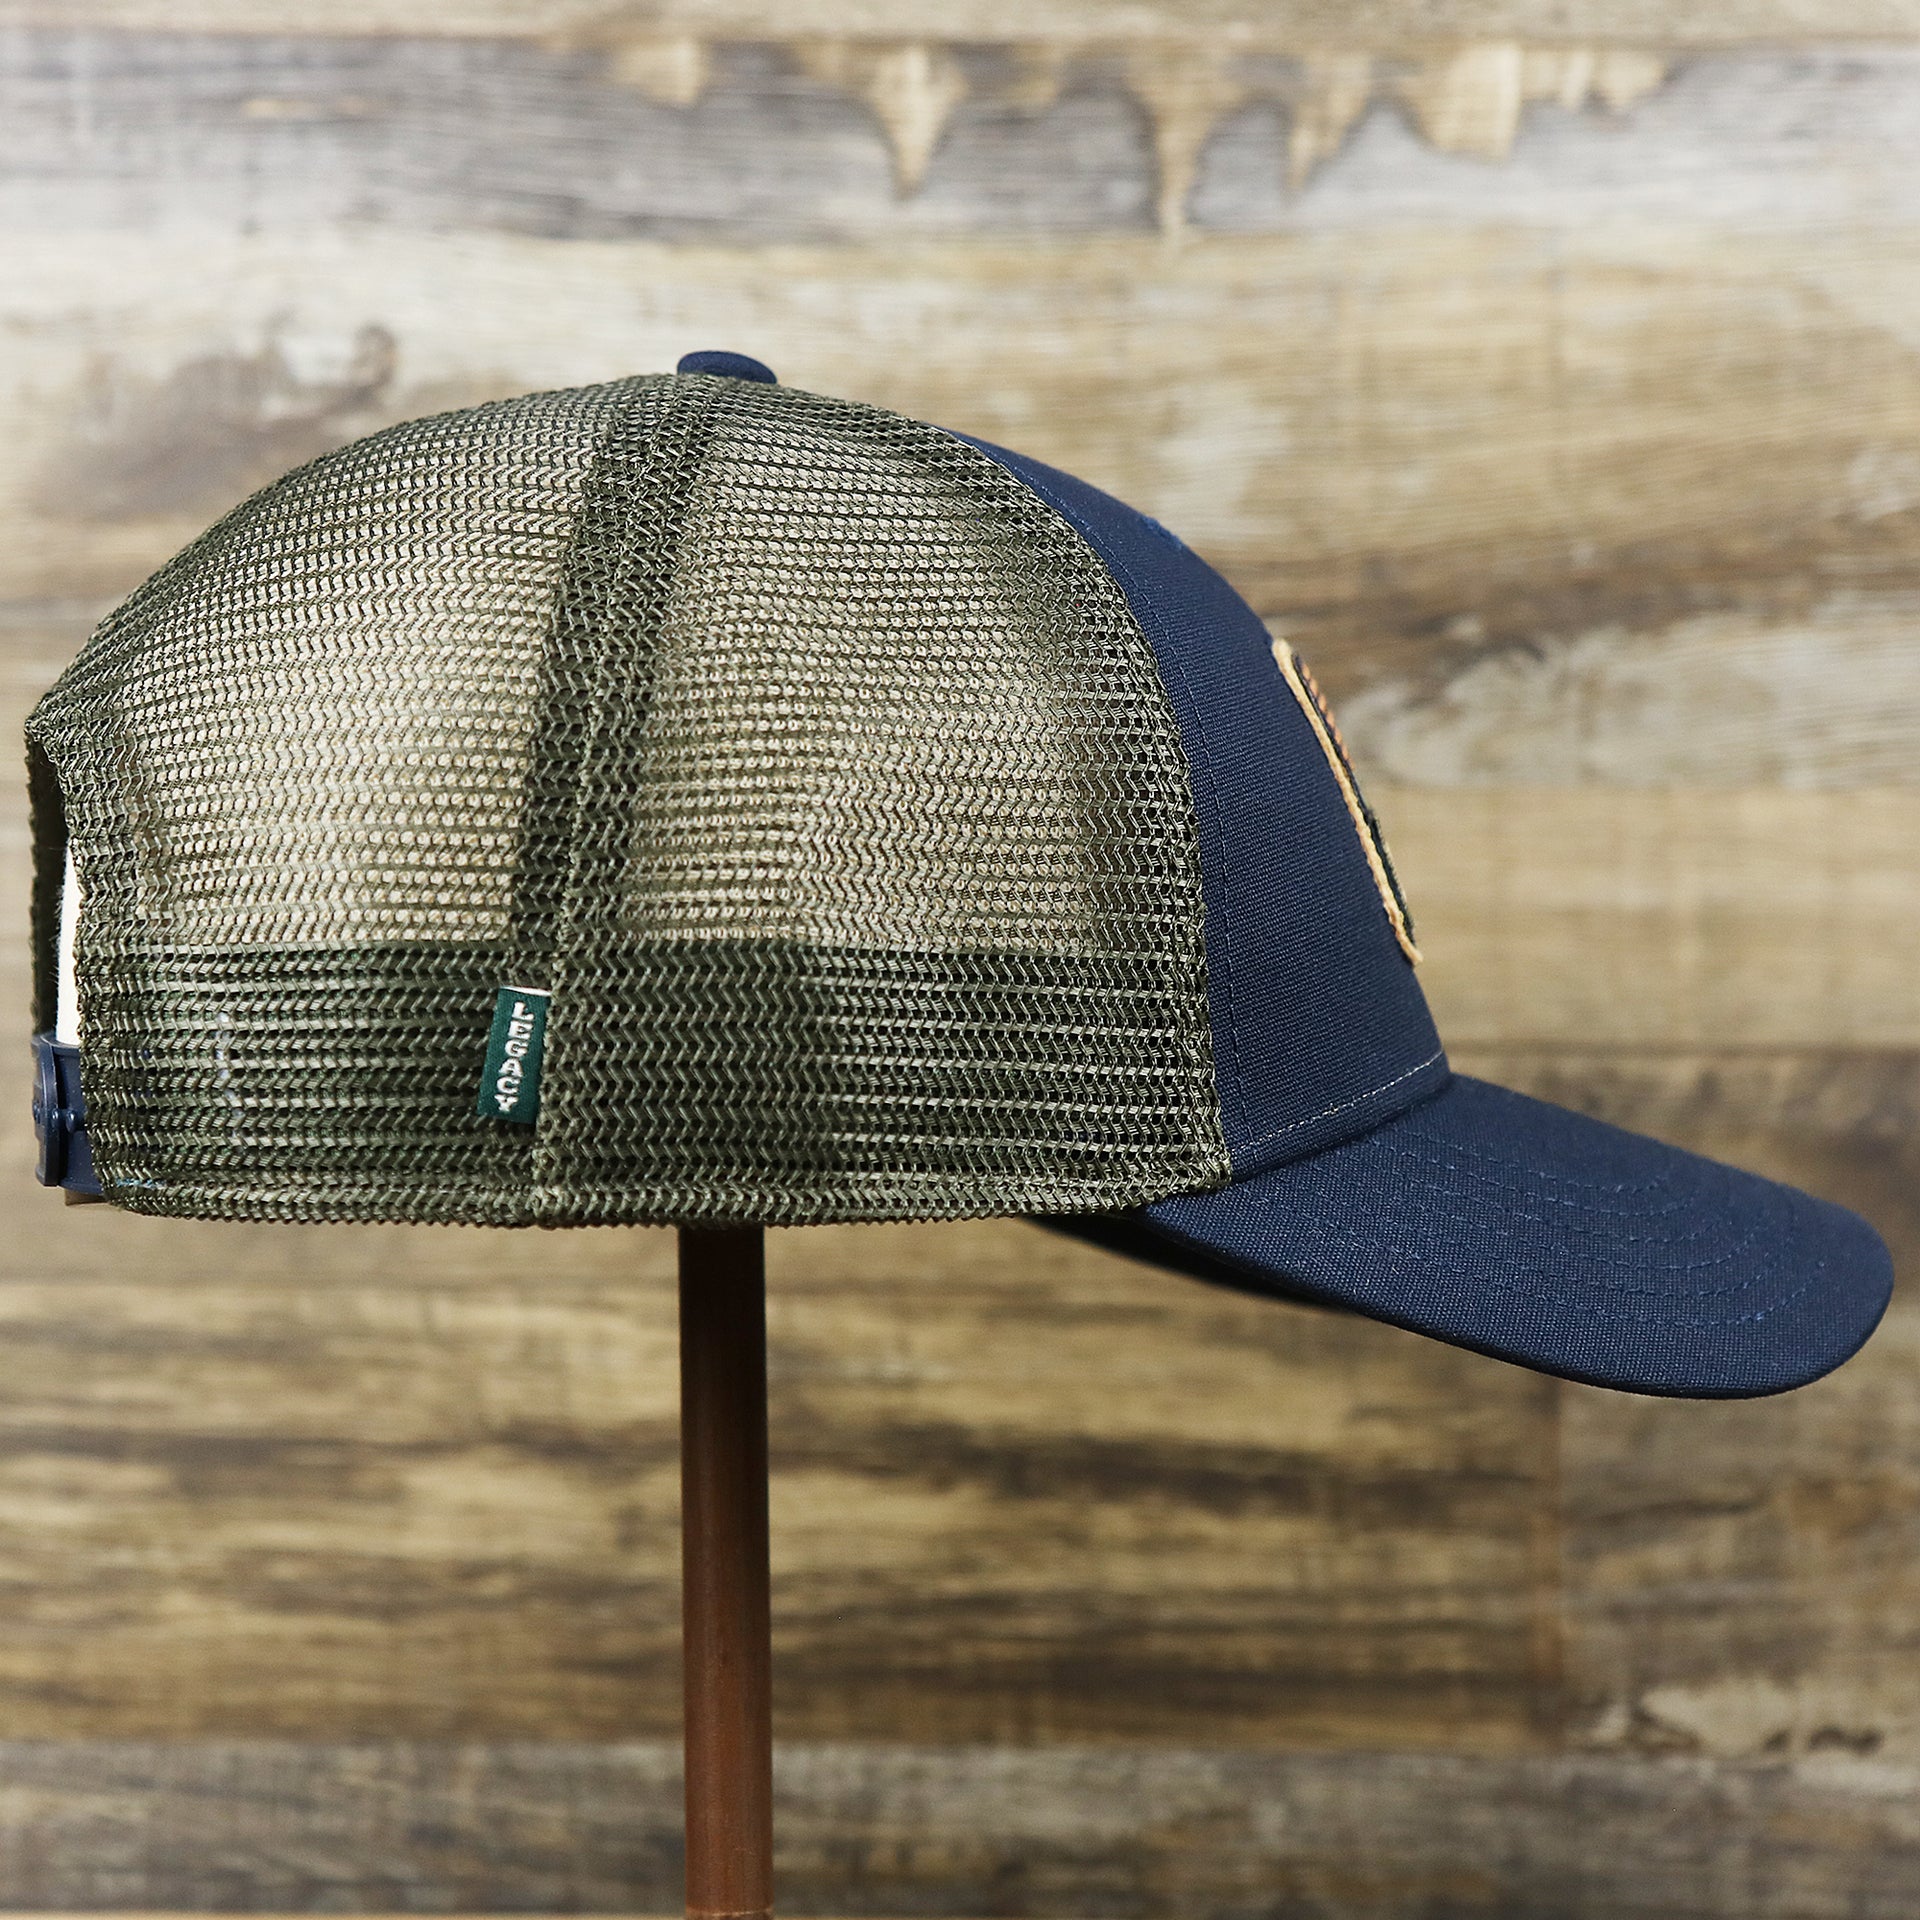 The wearer's right on the New Jersey Ocean City Sunset Mesh Back Trucker Hat | Navy Blue And Olive Mesh Trucker Hat